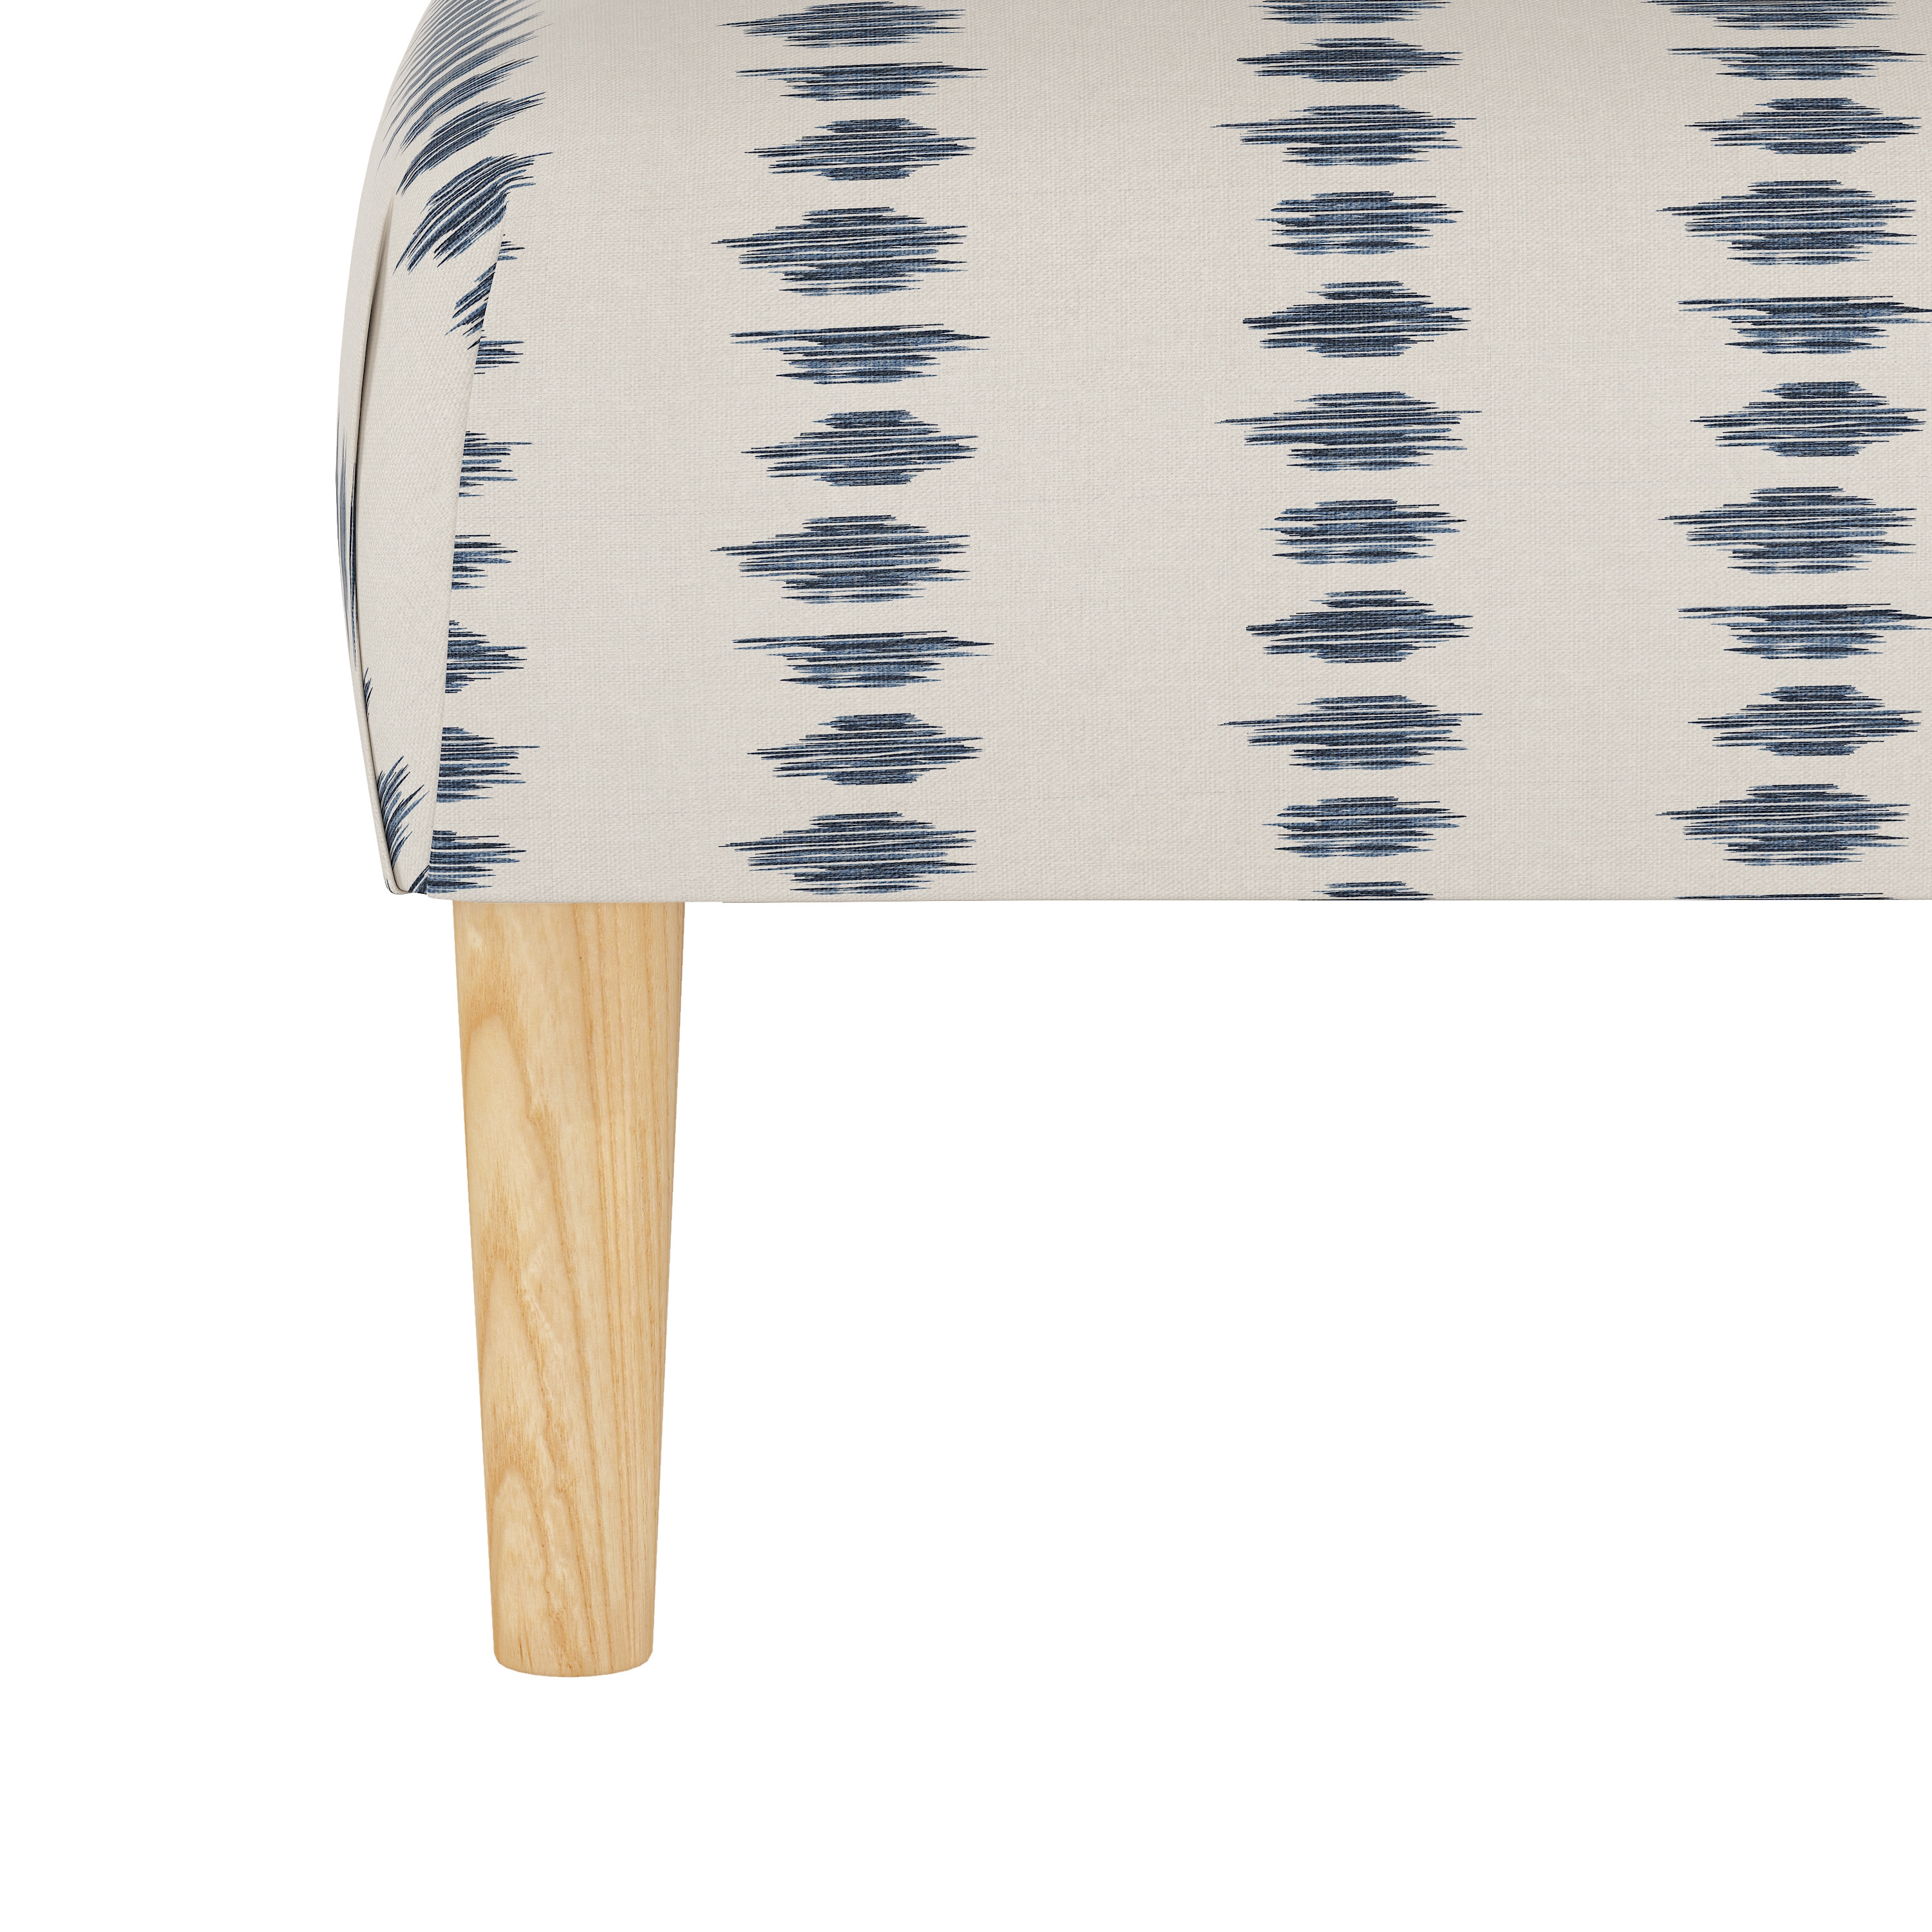 Algren Cocktail Ottoman with Cone Legs in Ikat Scribble Slate Oga - Image 2